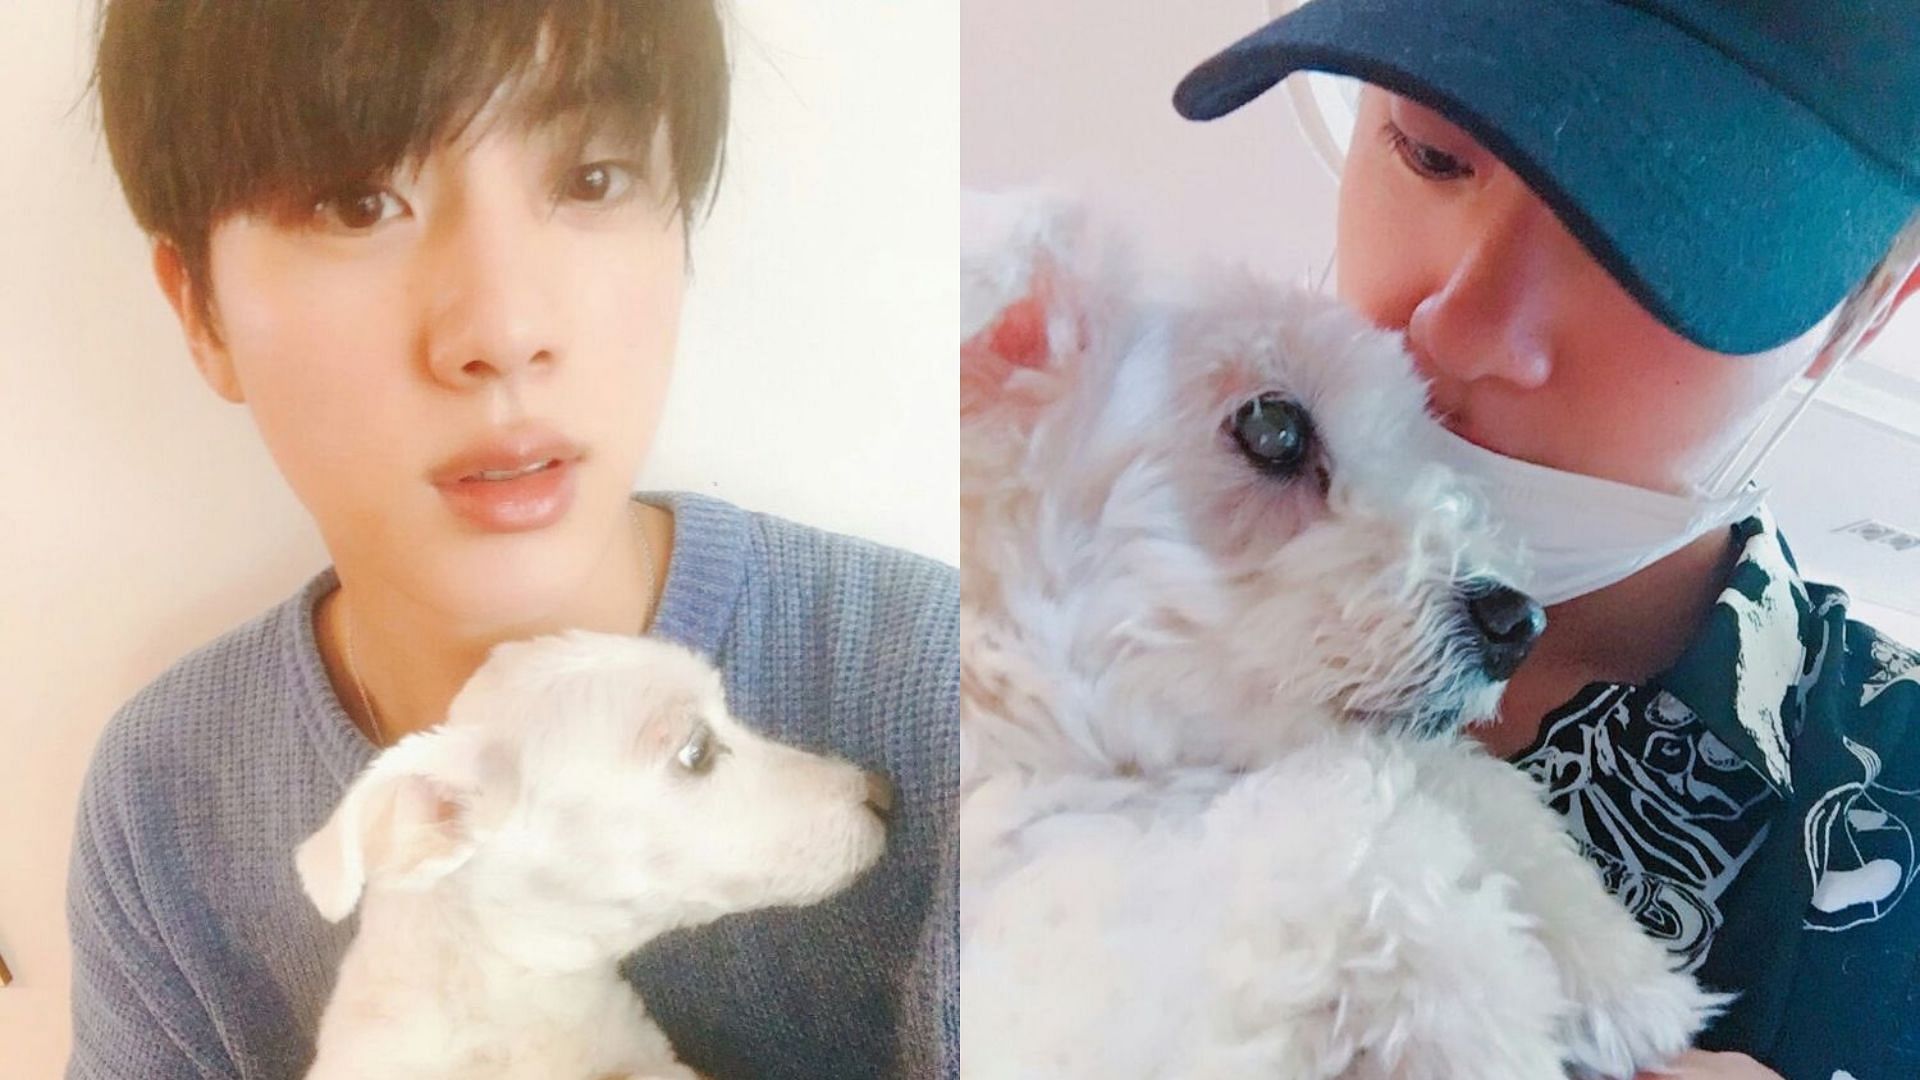 BTS Jin features alongside his late dog Jjangu in The Astronaut